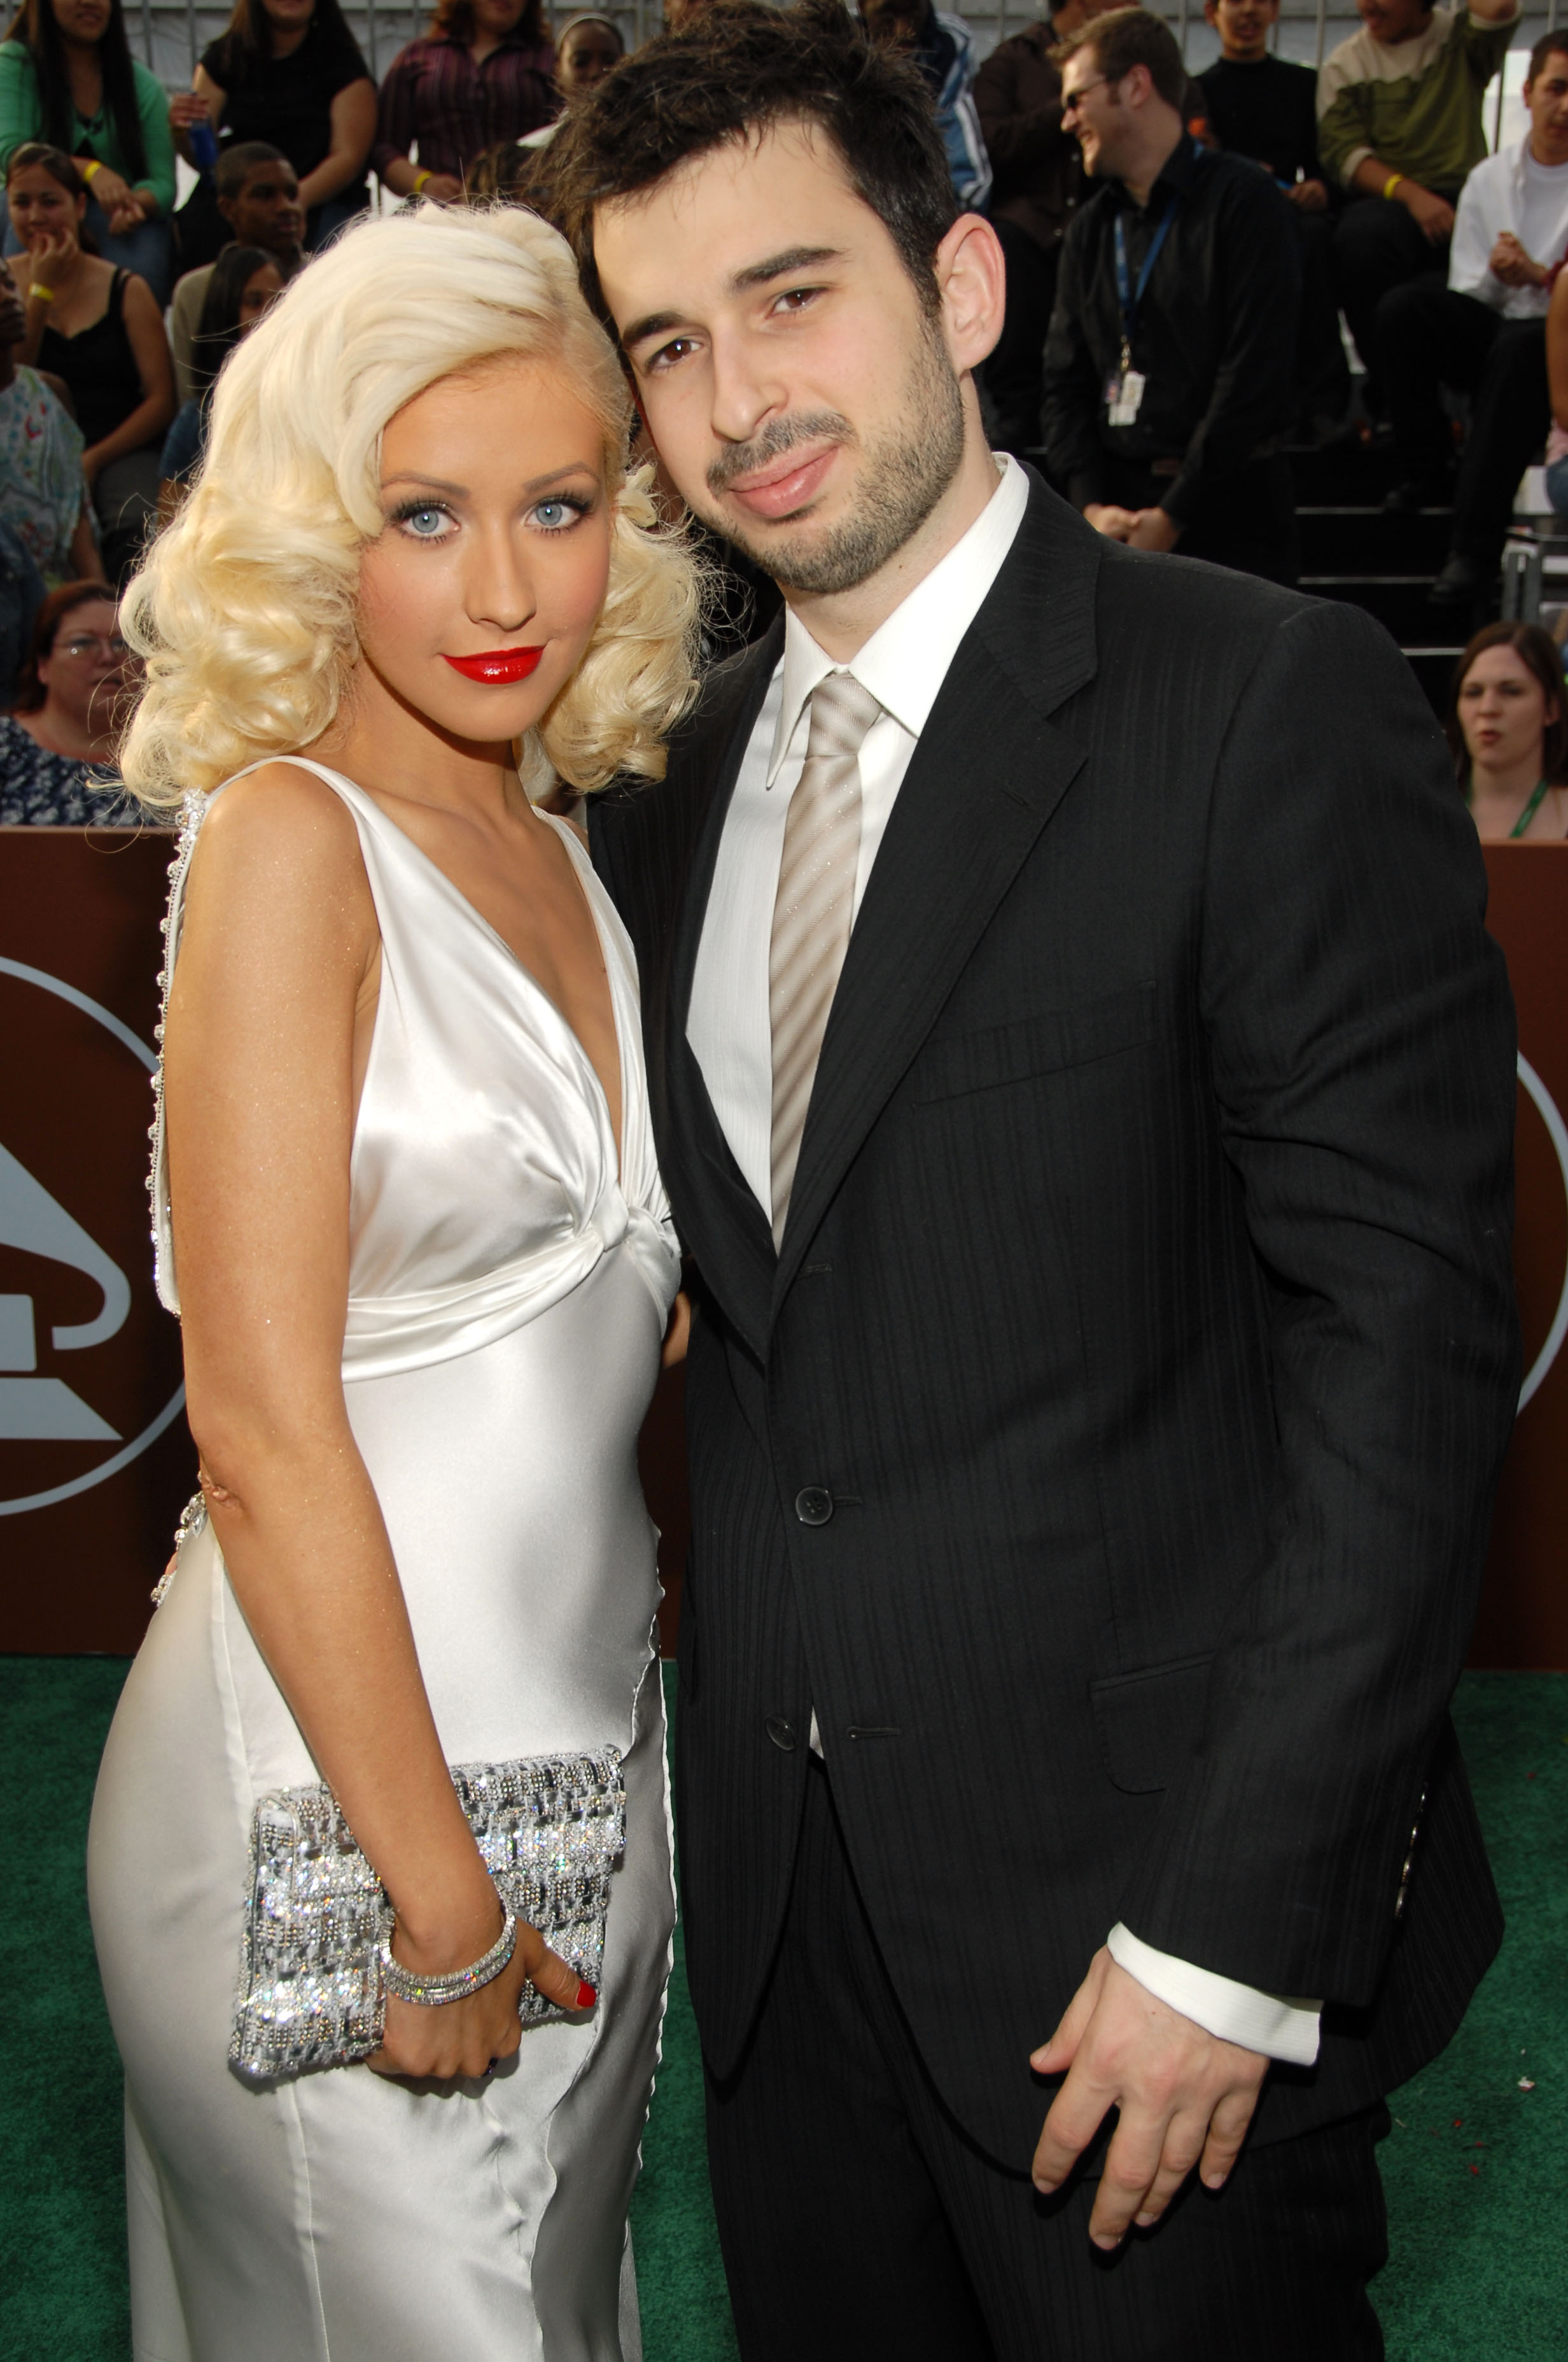 Christina Aguilera and Jordan Bratman  at the Grammy Awards in 2006 | Source: Getty Images